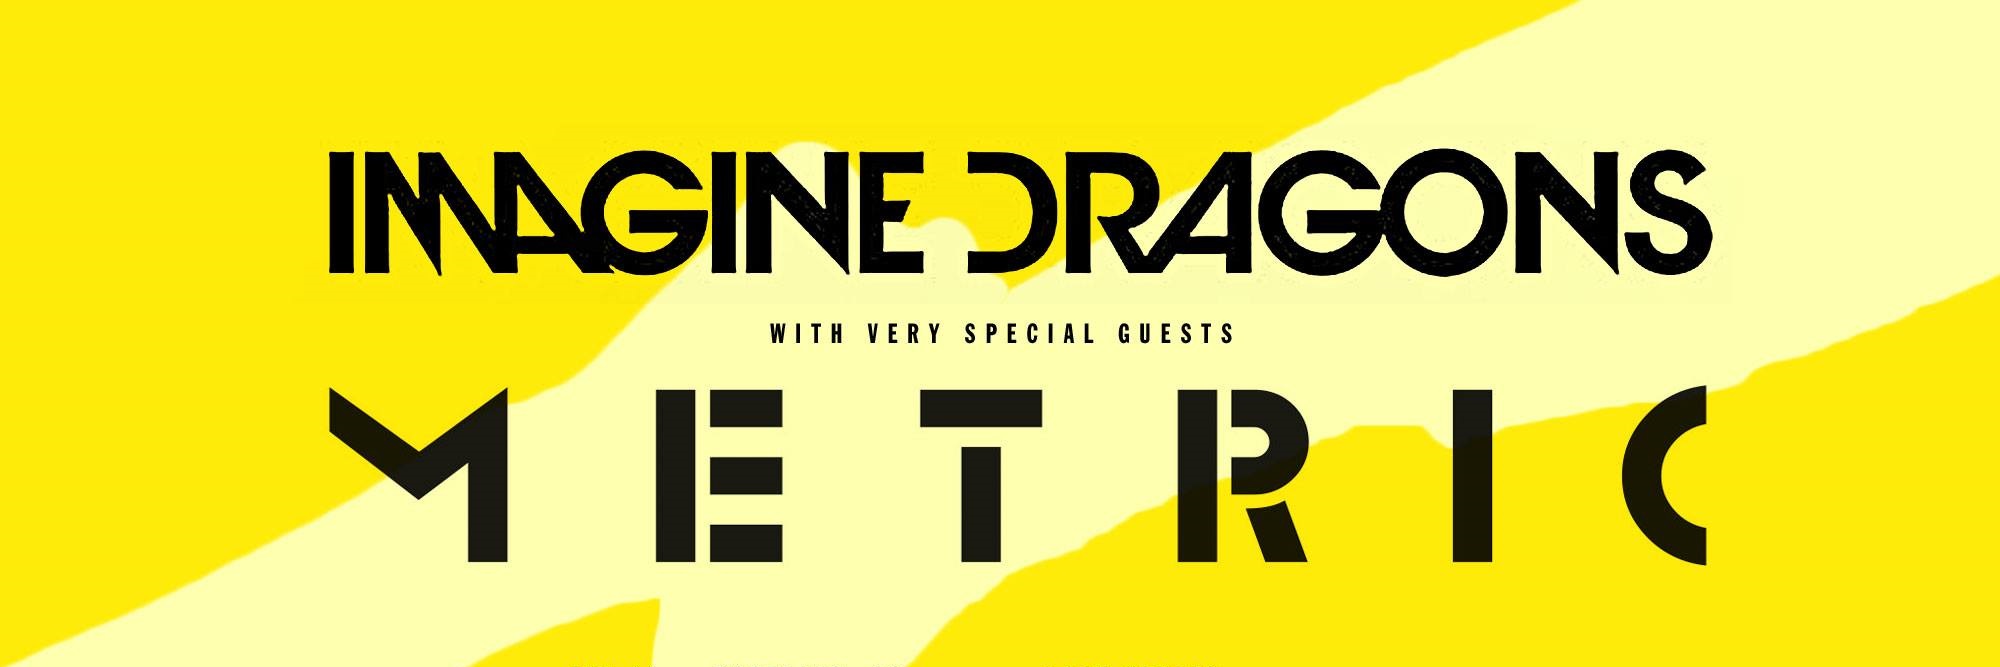 IMAGINE DRAGONS ANNOUNCE THE SMOKE + MIRRORS TOUR WITH SPECIAL GUEST METRIC